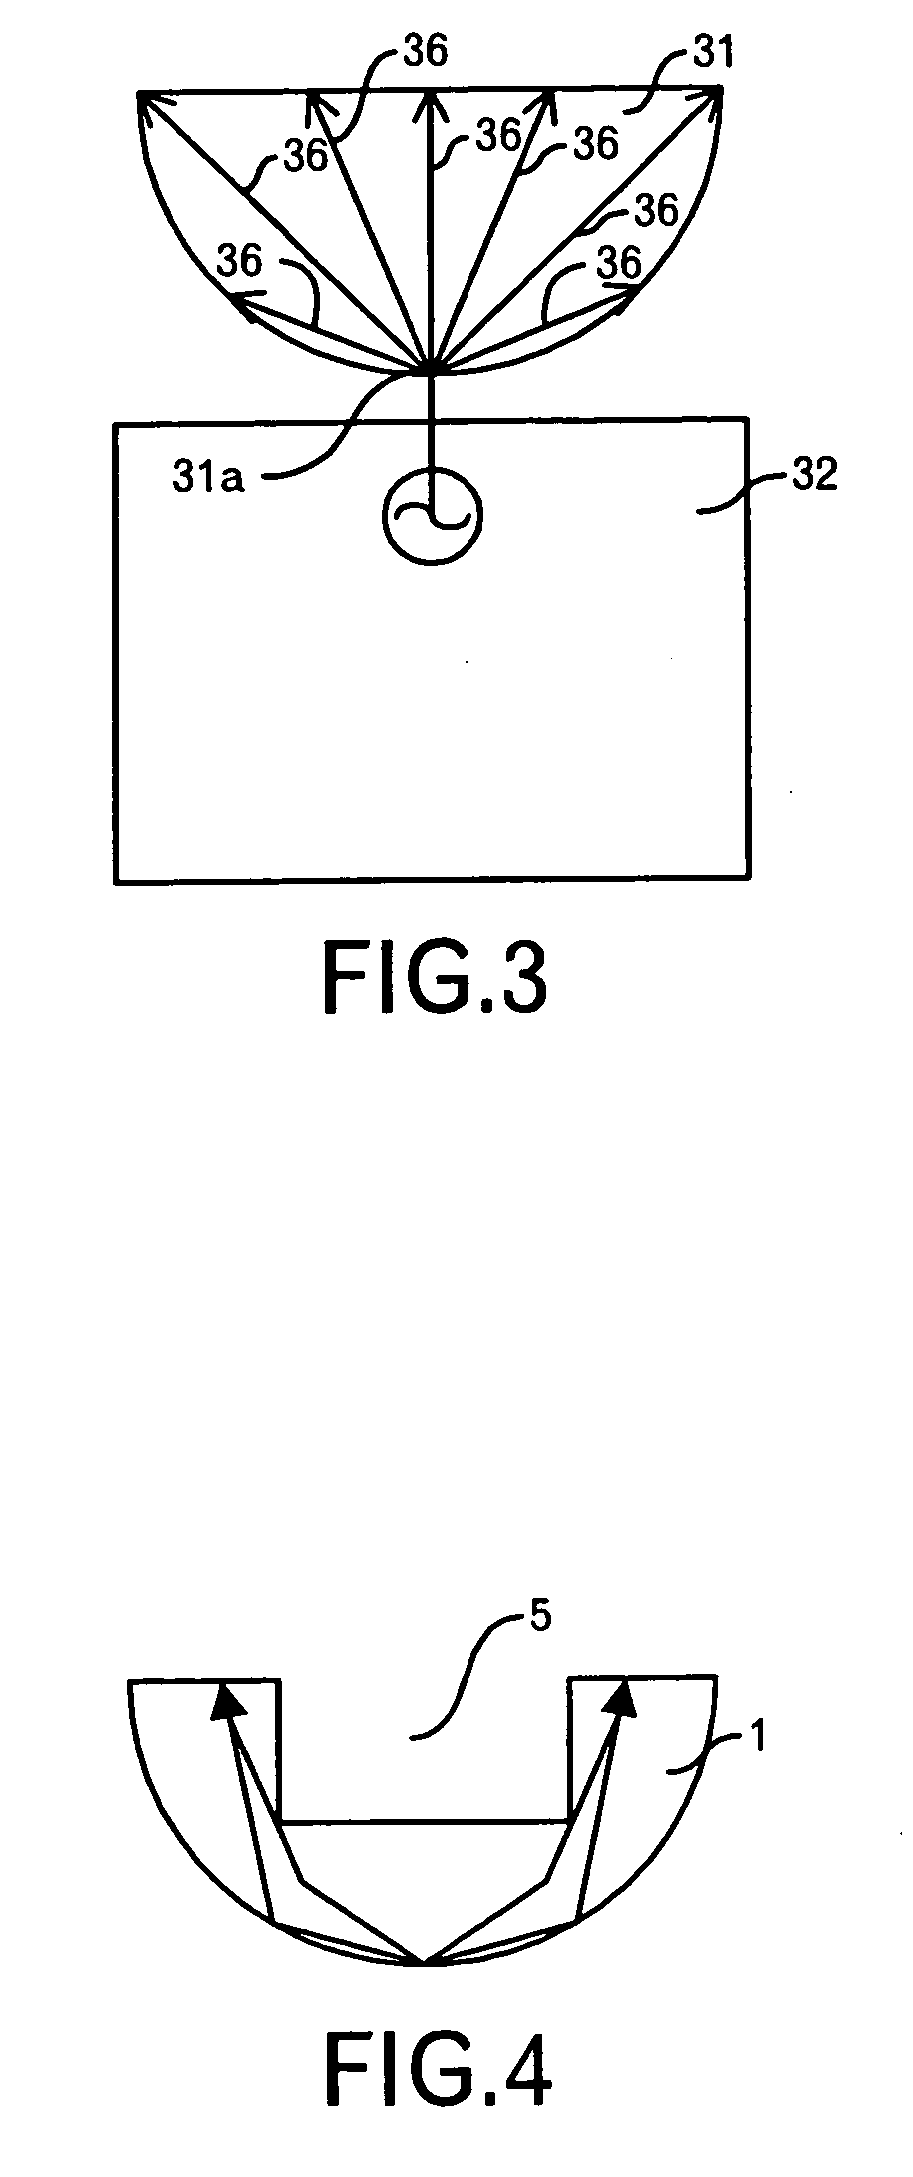 Antenna and dielectric substrate for antenna